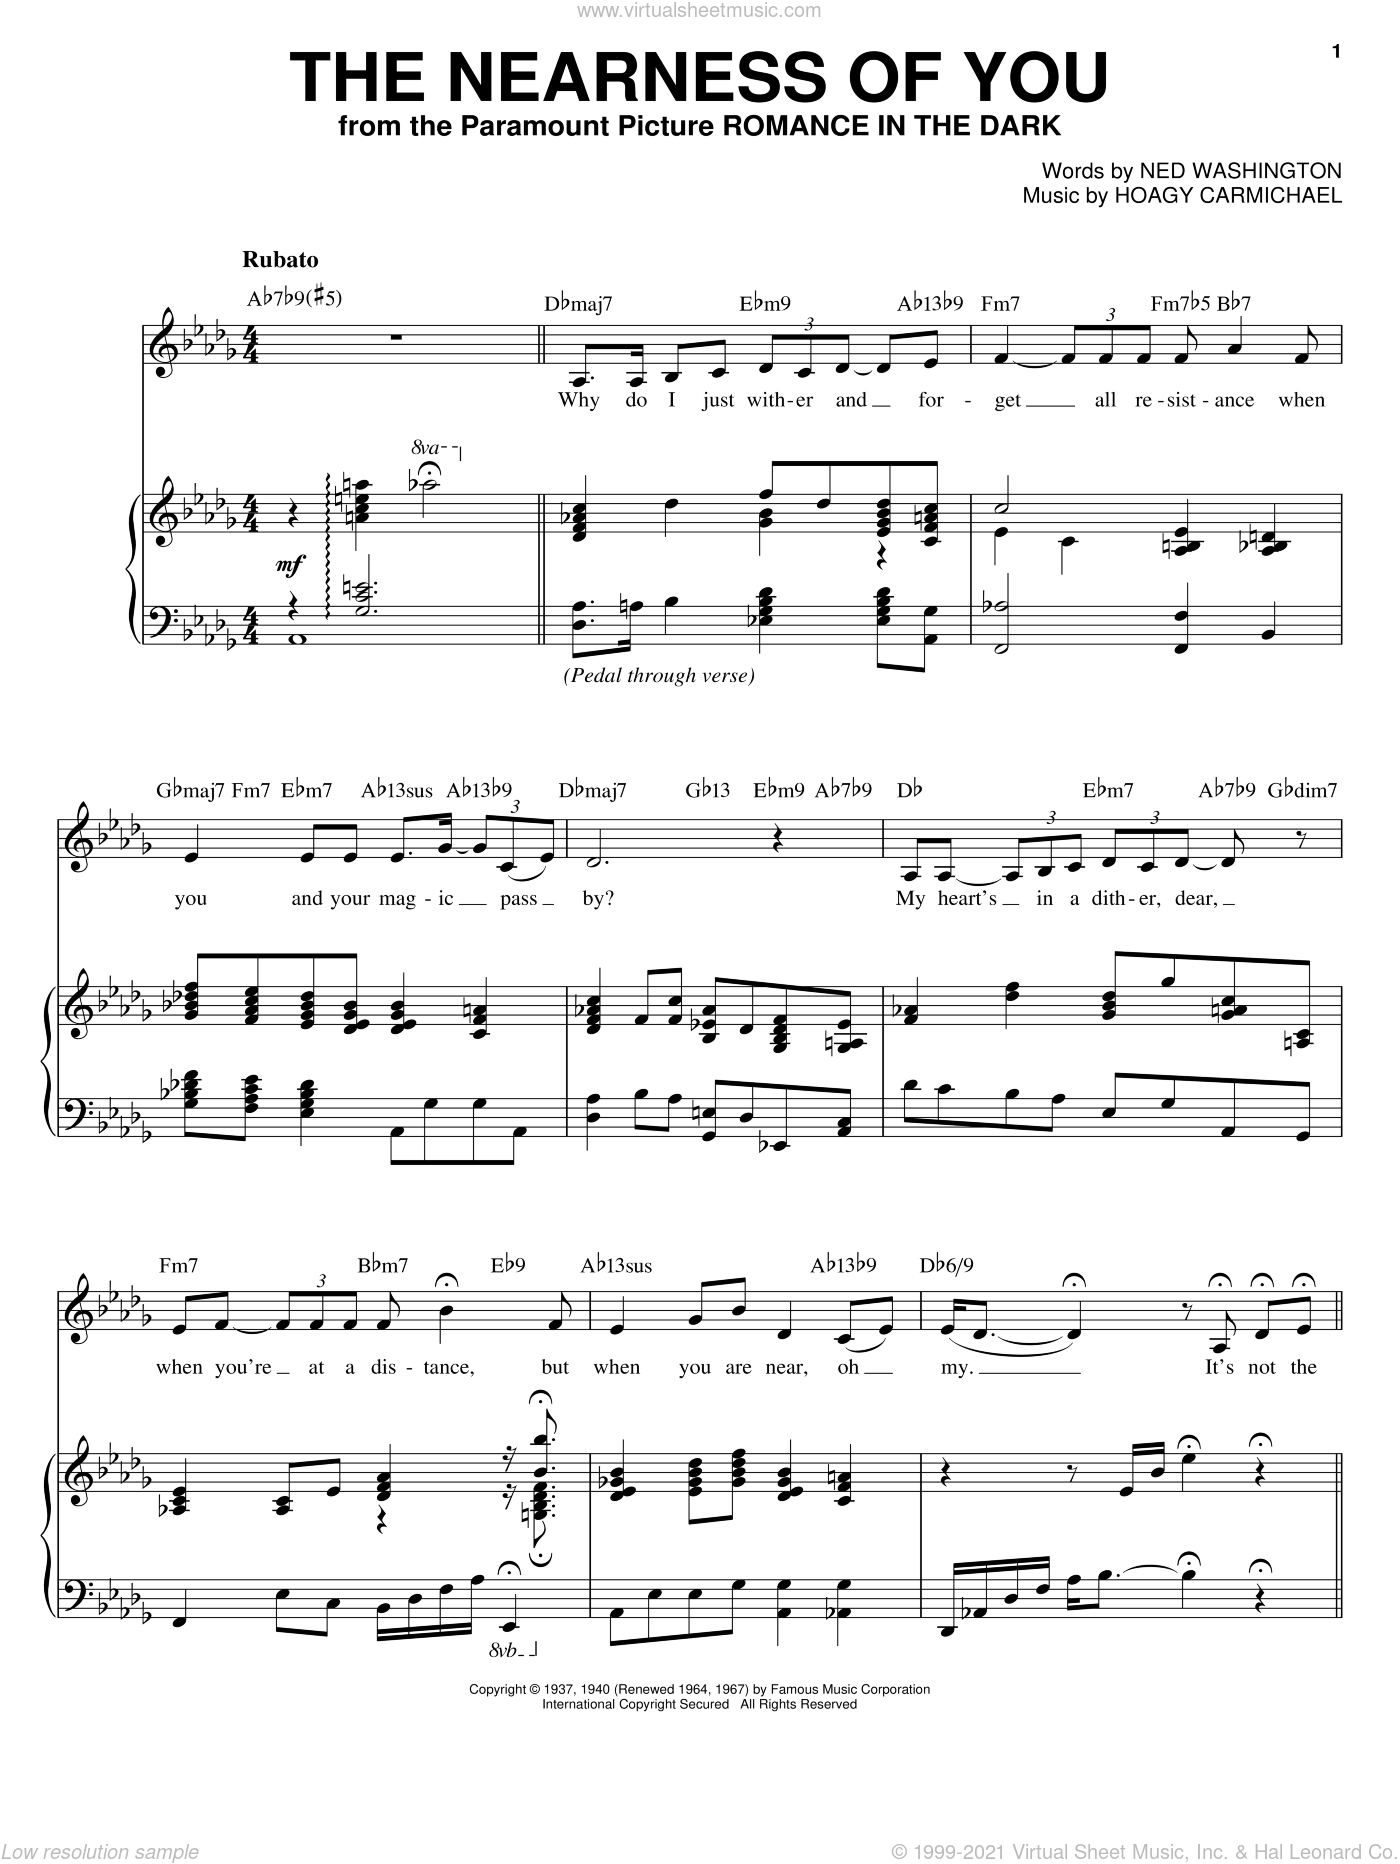 Https Www Virtualsheetmusic Com Score Hl 14942 Html Https Cdn3 Virtualsheetmusic Com Images First Pages Hl Hl 14942first Big Png Image Preview Of The Passion Play Edit 8 Sheet Music For Voice Piano Or Guitar By Jethro Tull Passion Play Edit 8